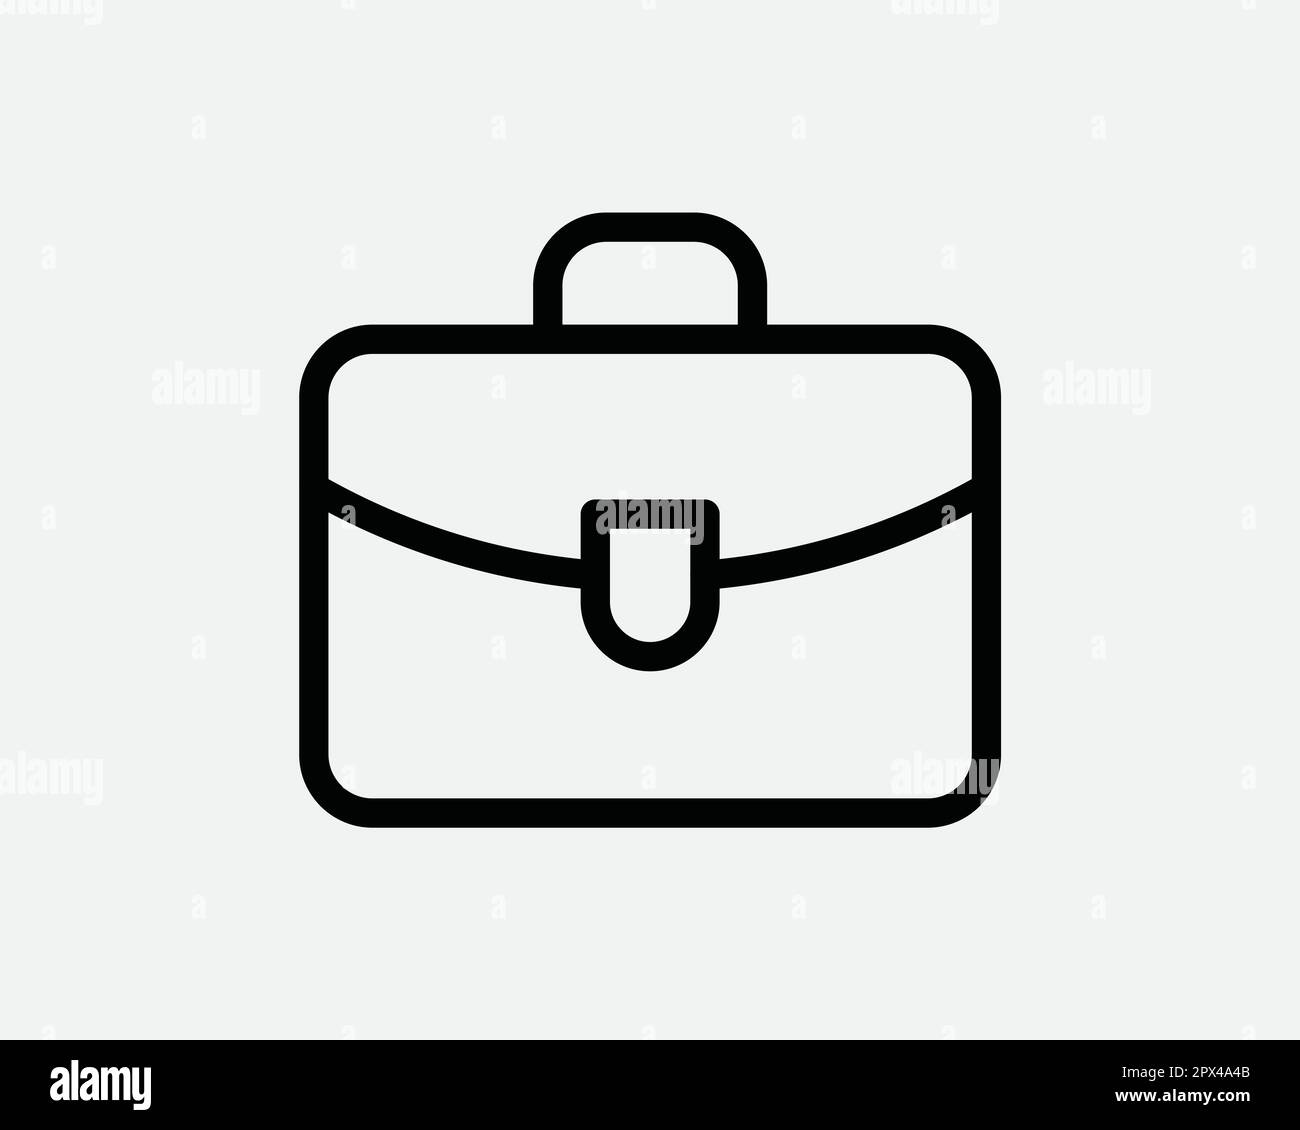 Briefcase Thin Line Icon. Handheld Suitcase Baggage Business Office  Job Travel Linear Sign Symbol. Black Vector Graphic Illustration Clipart Cricut Stock Vector